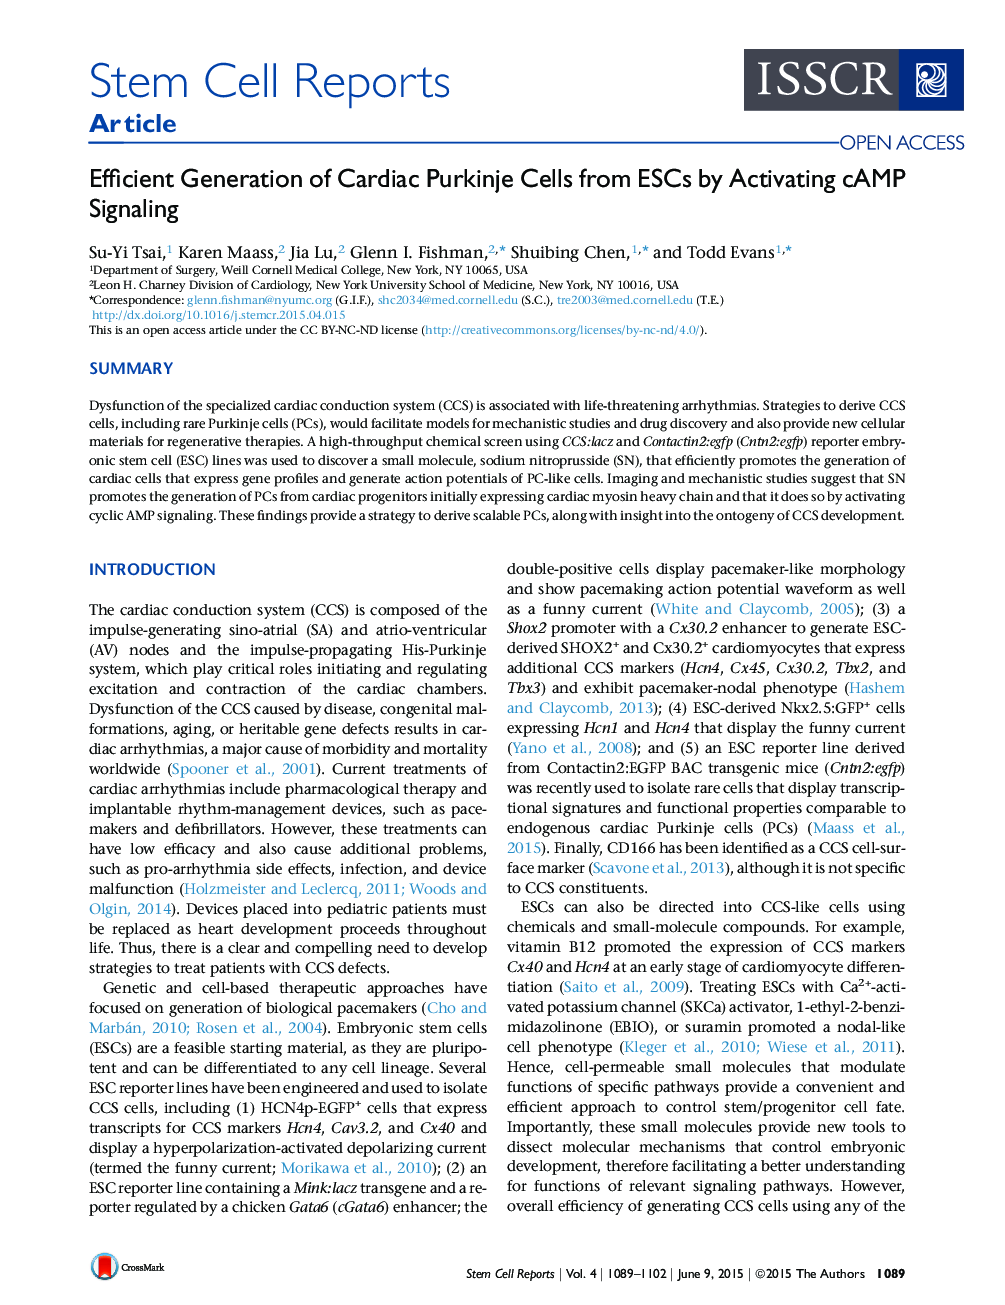 Efficient Generation of Cardiac Purkinje Cells from ESCs by Activating cAMP Signaling 